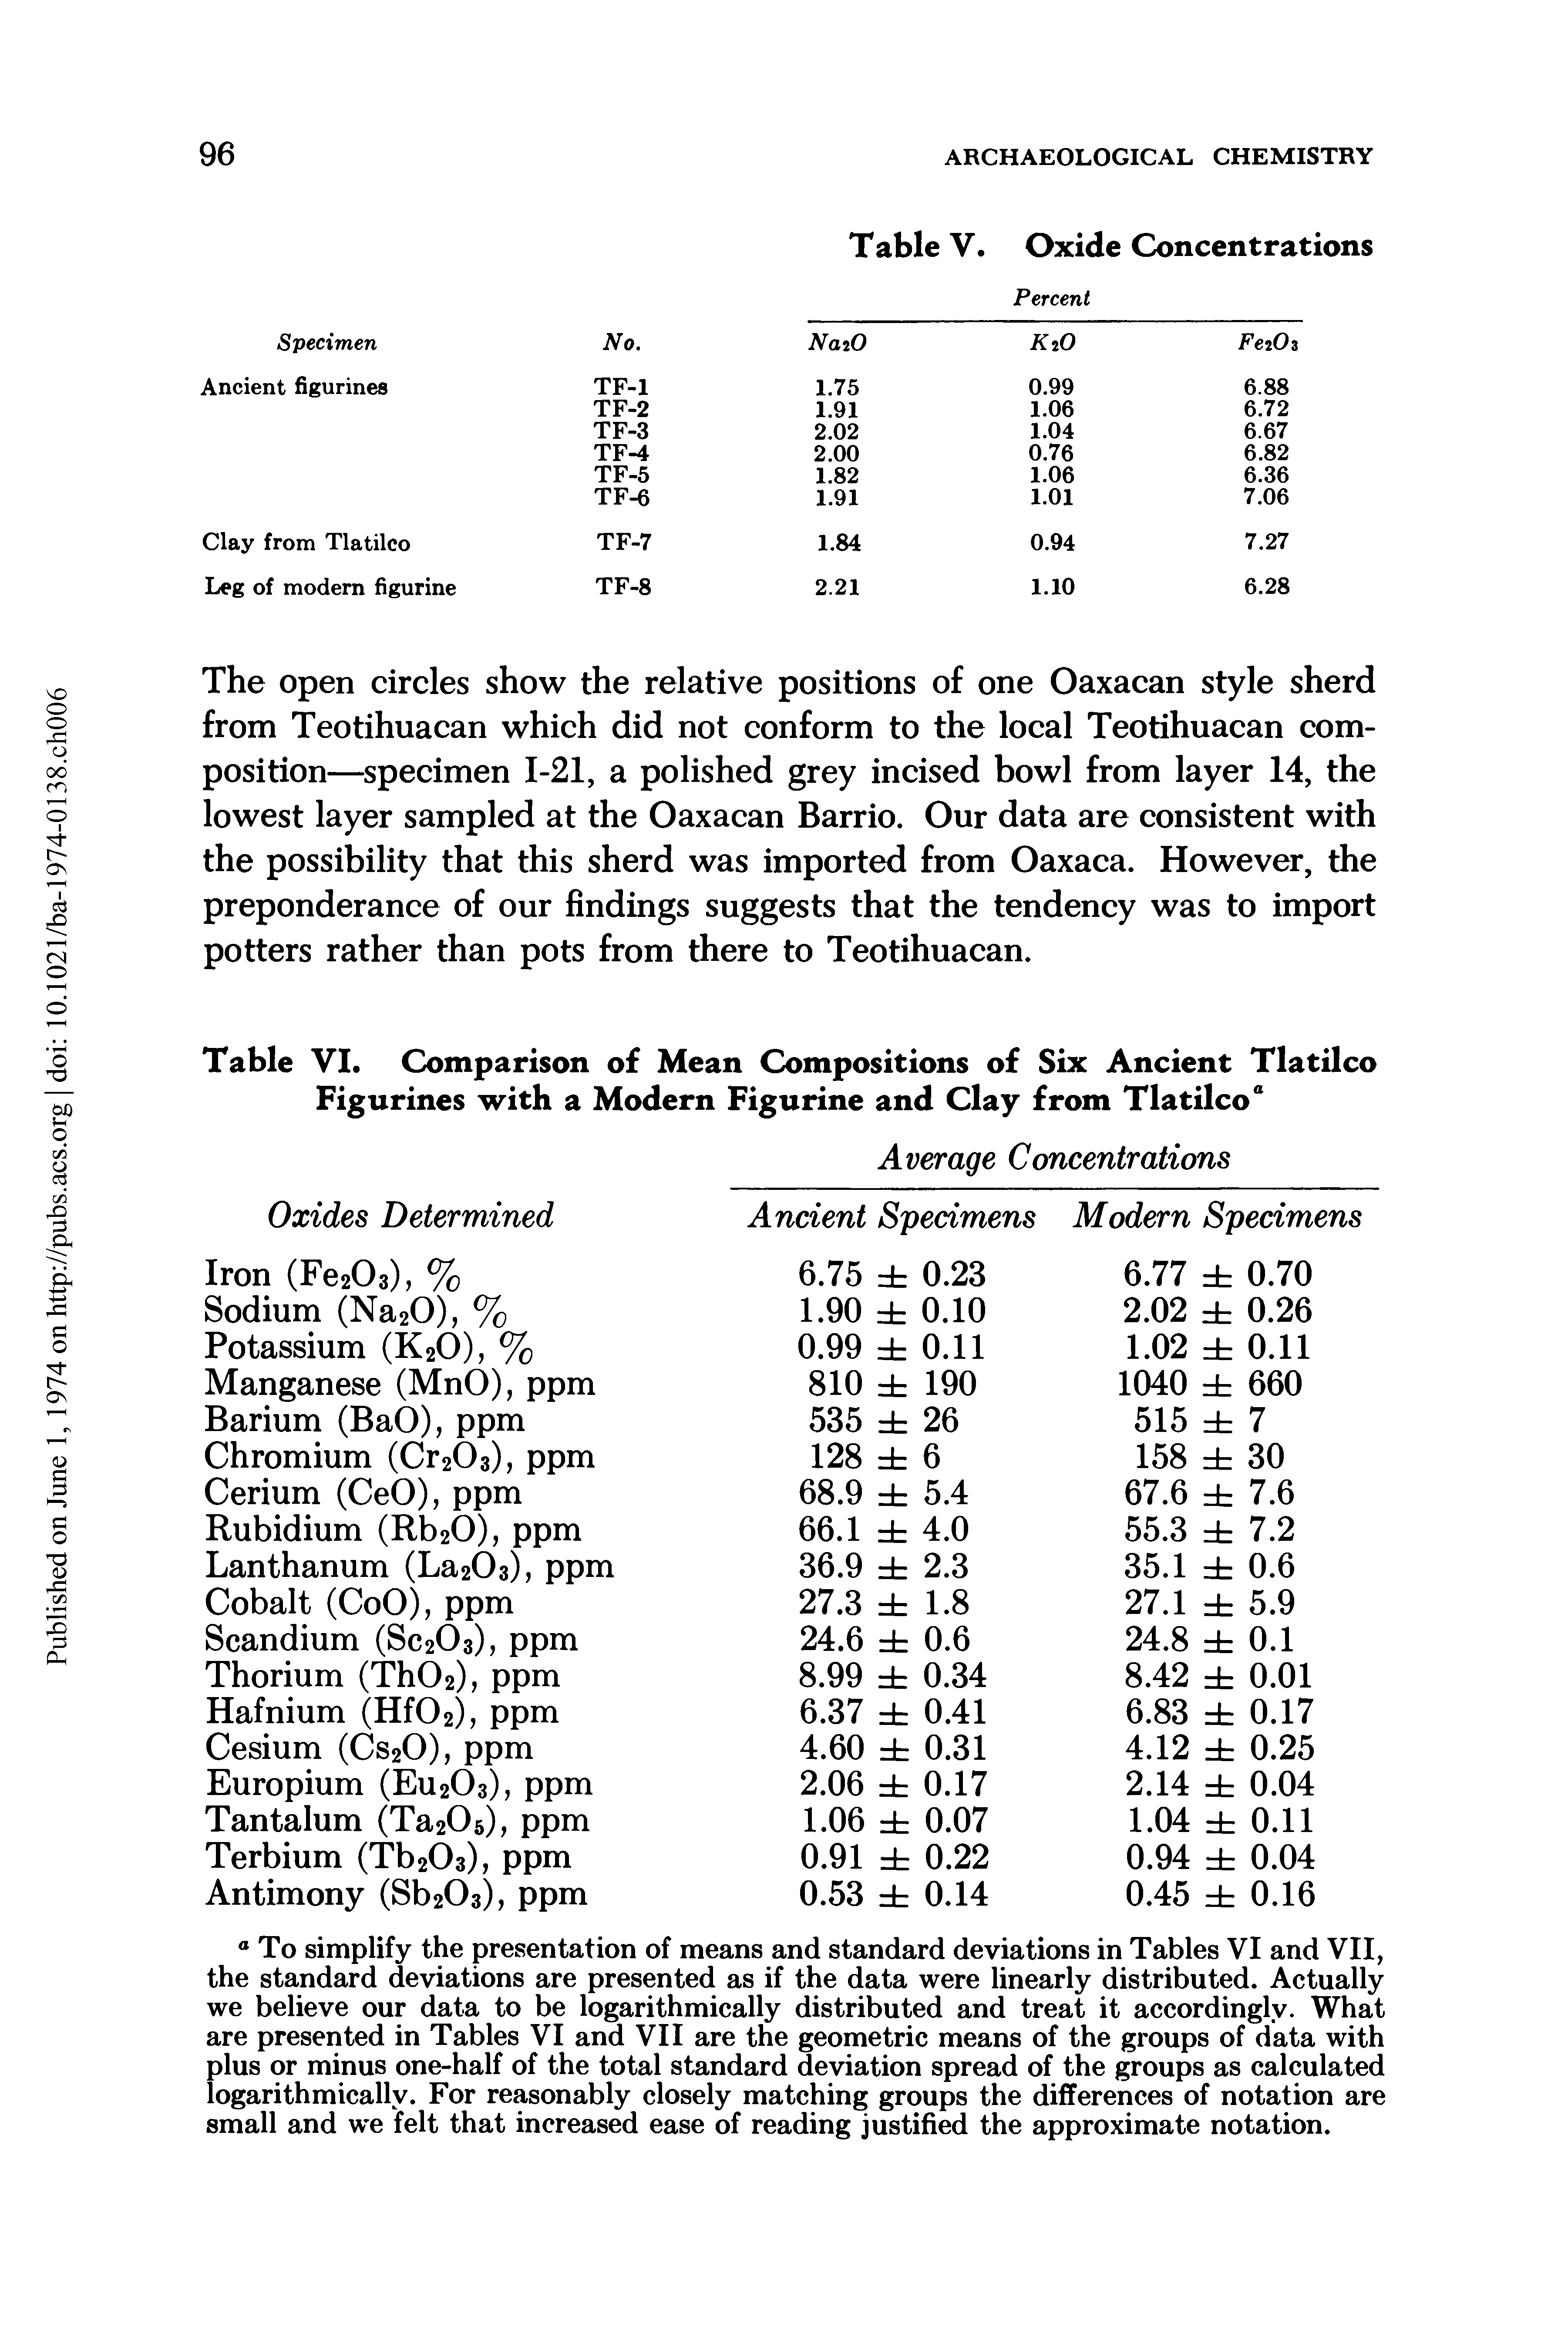 Table VI. Comparison of Mean Compositions of Six Ancient Tlatilco Figurines with a Modern Figurine and Clay from Tlatilco0...